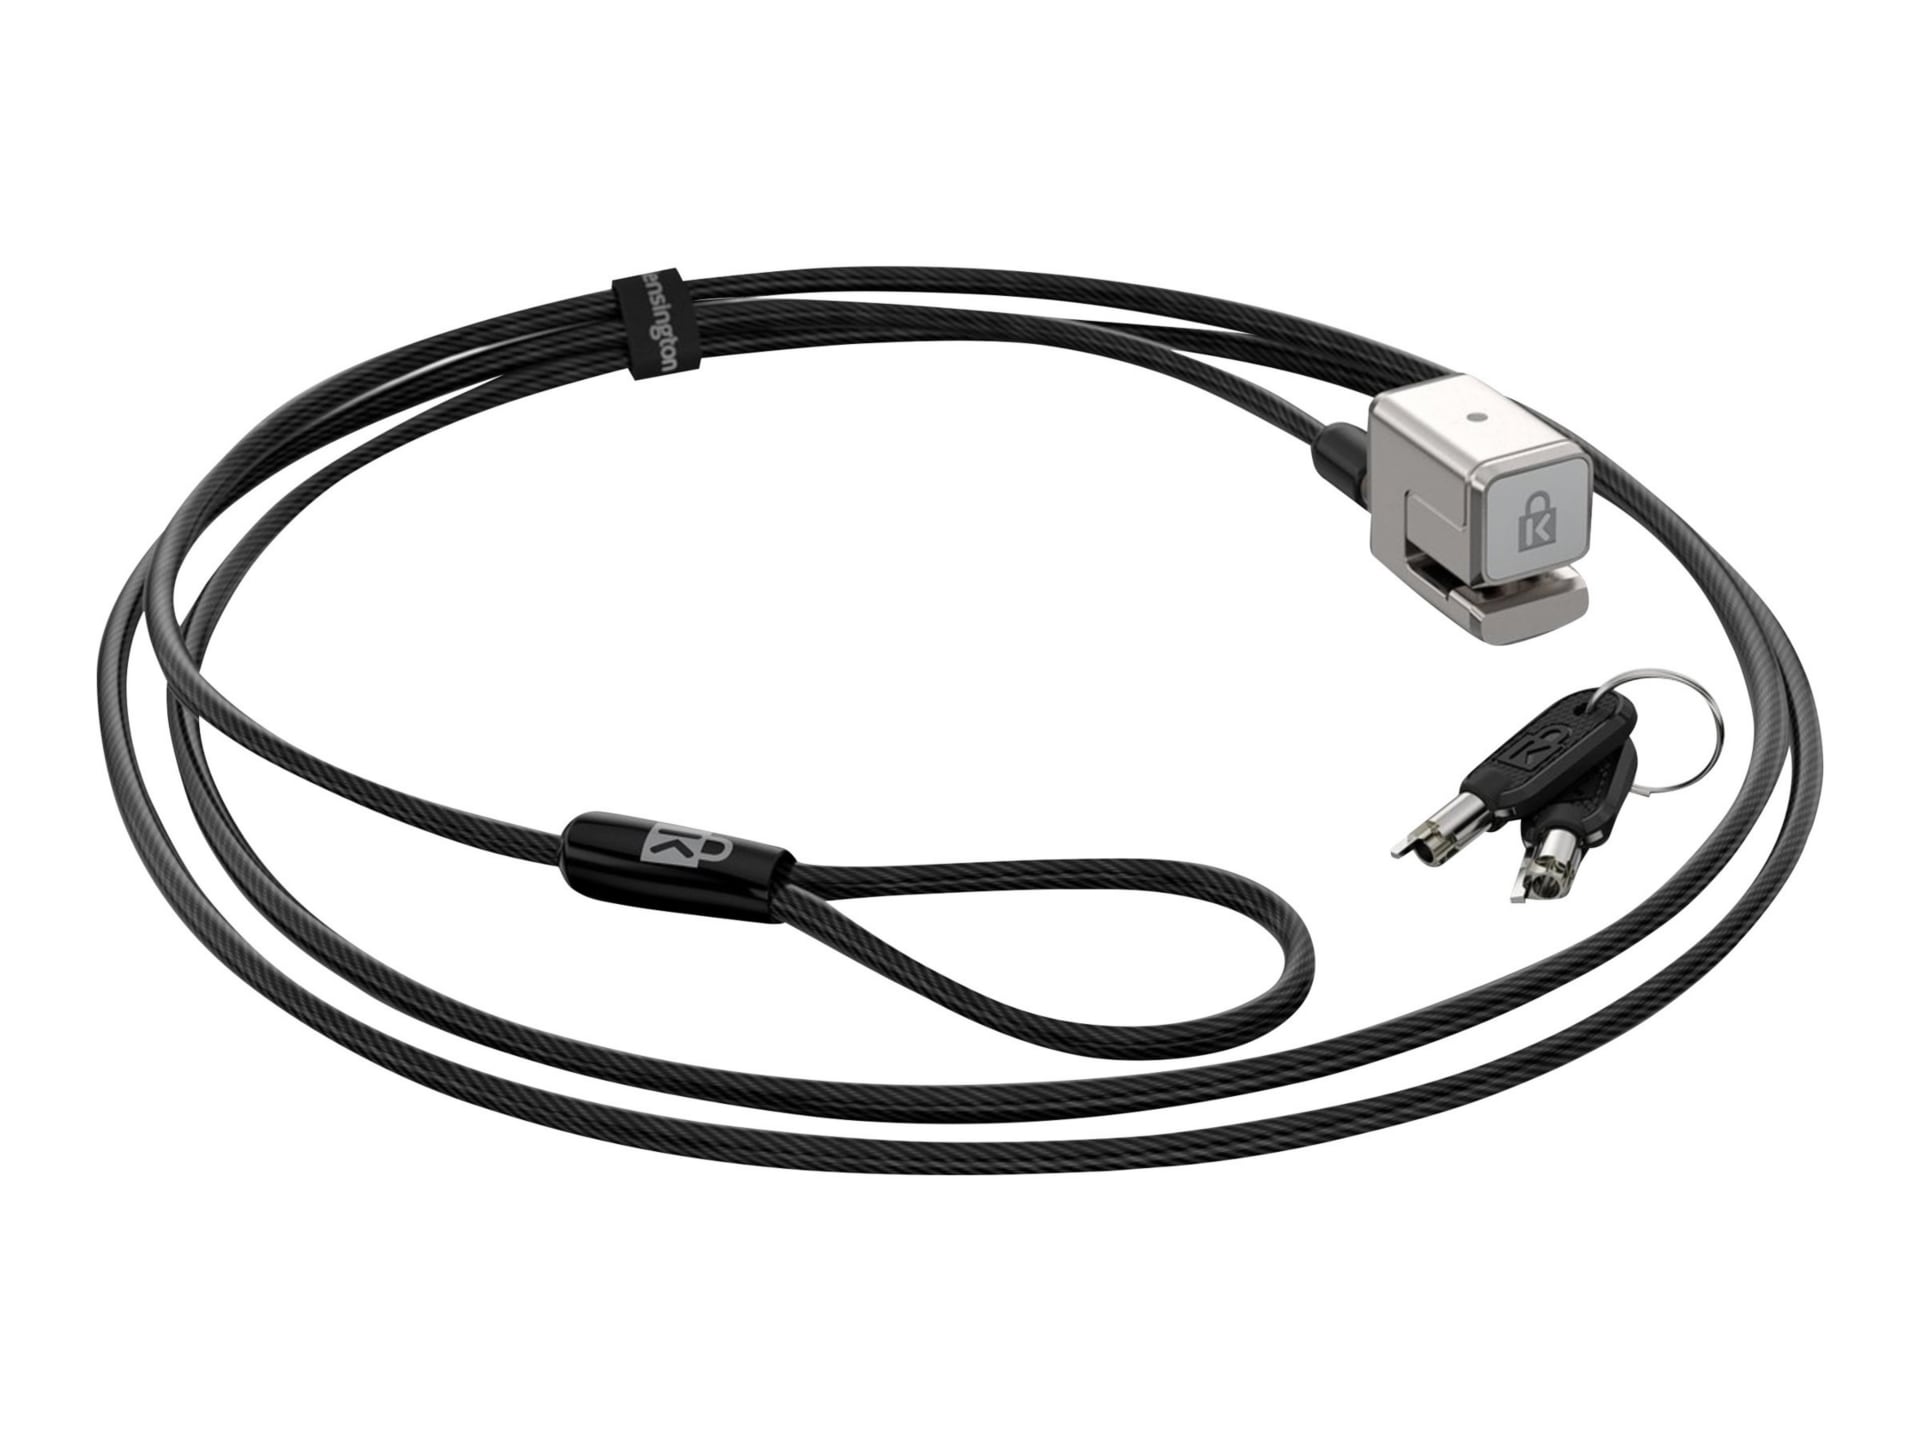 Kensington Keyed Cable Lock for Surface Pro & Surface Go - security cable l